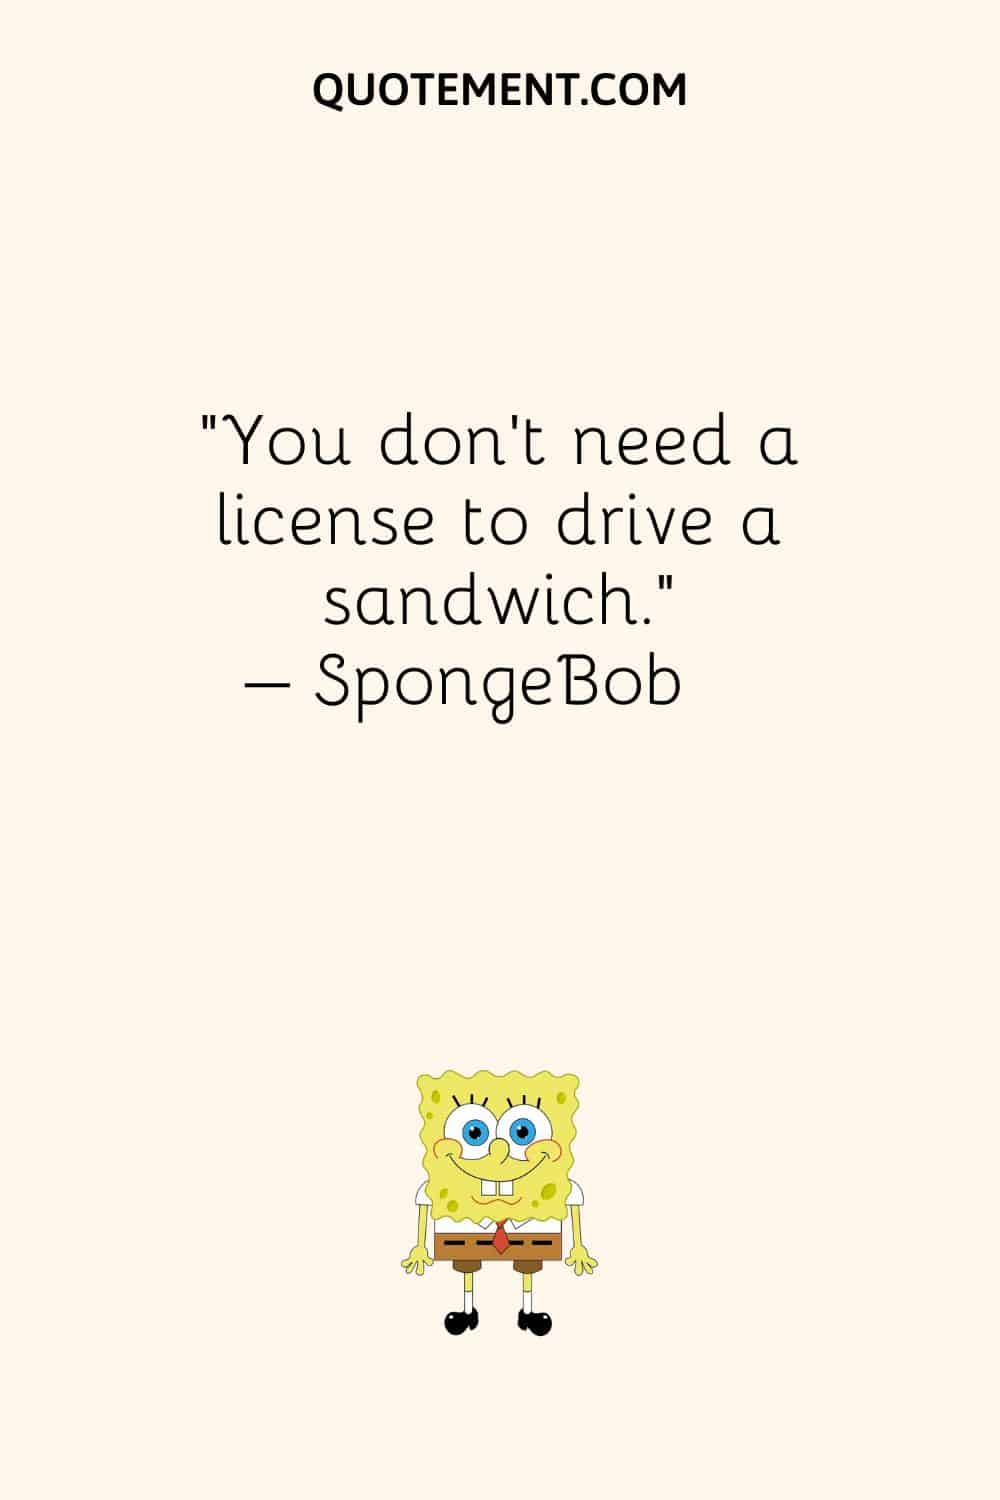 “You don’t need a license to drive a sandwich.” – SpongeBob